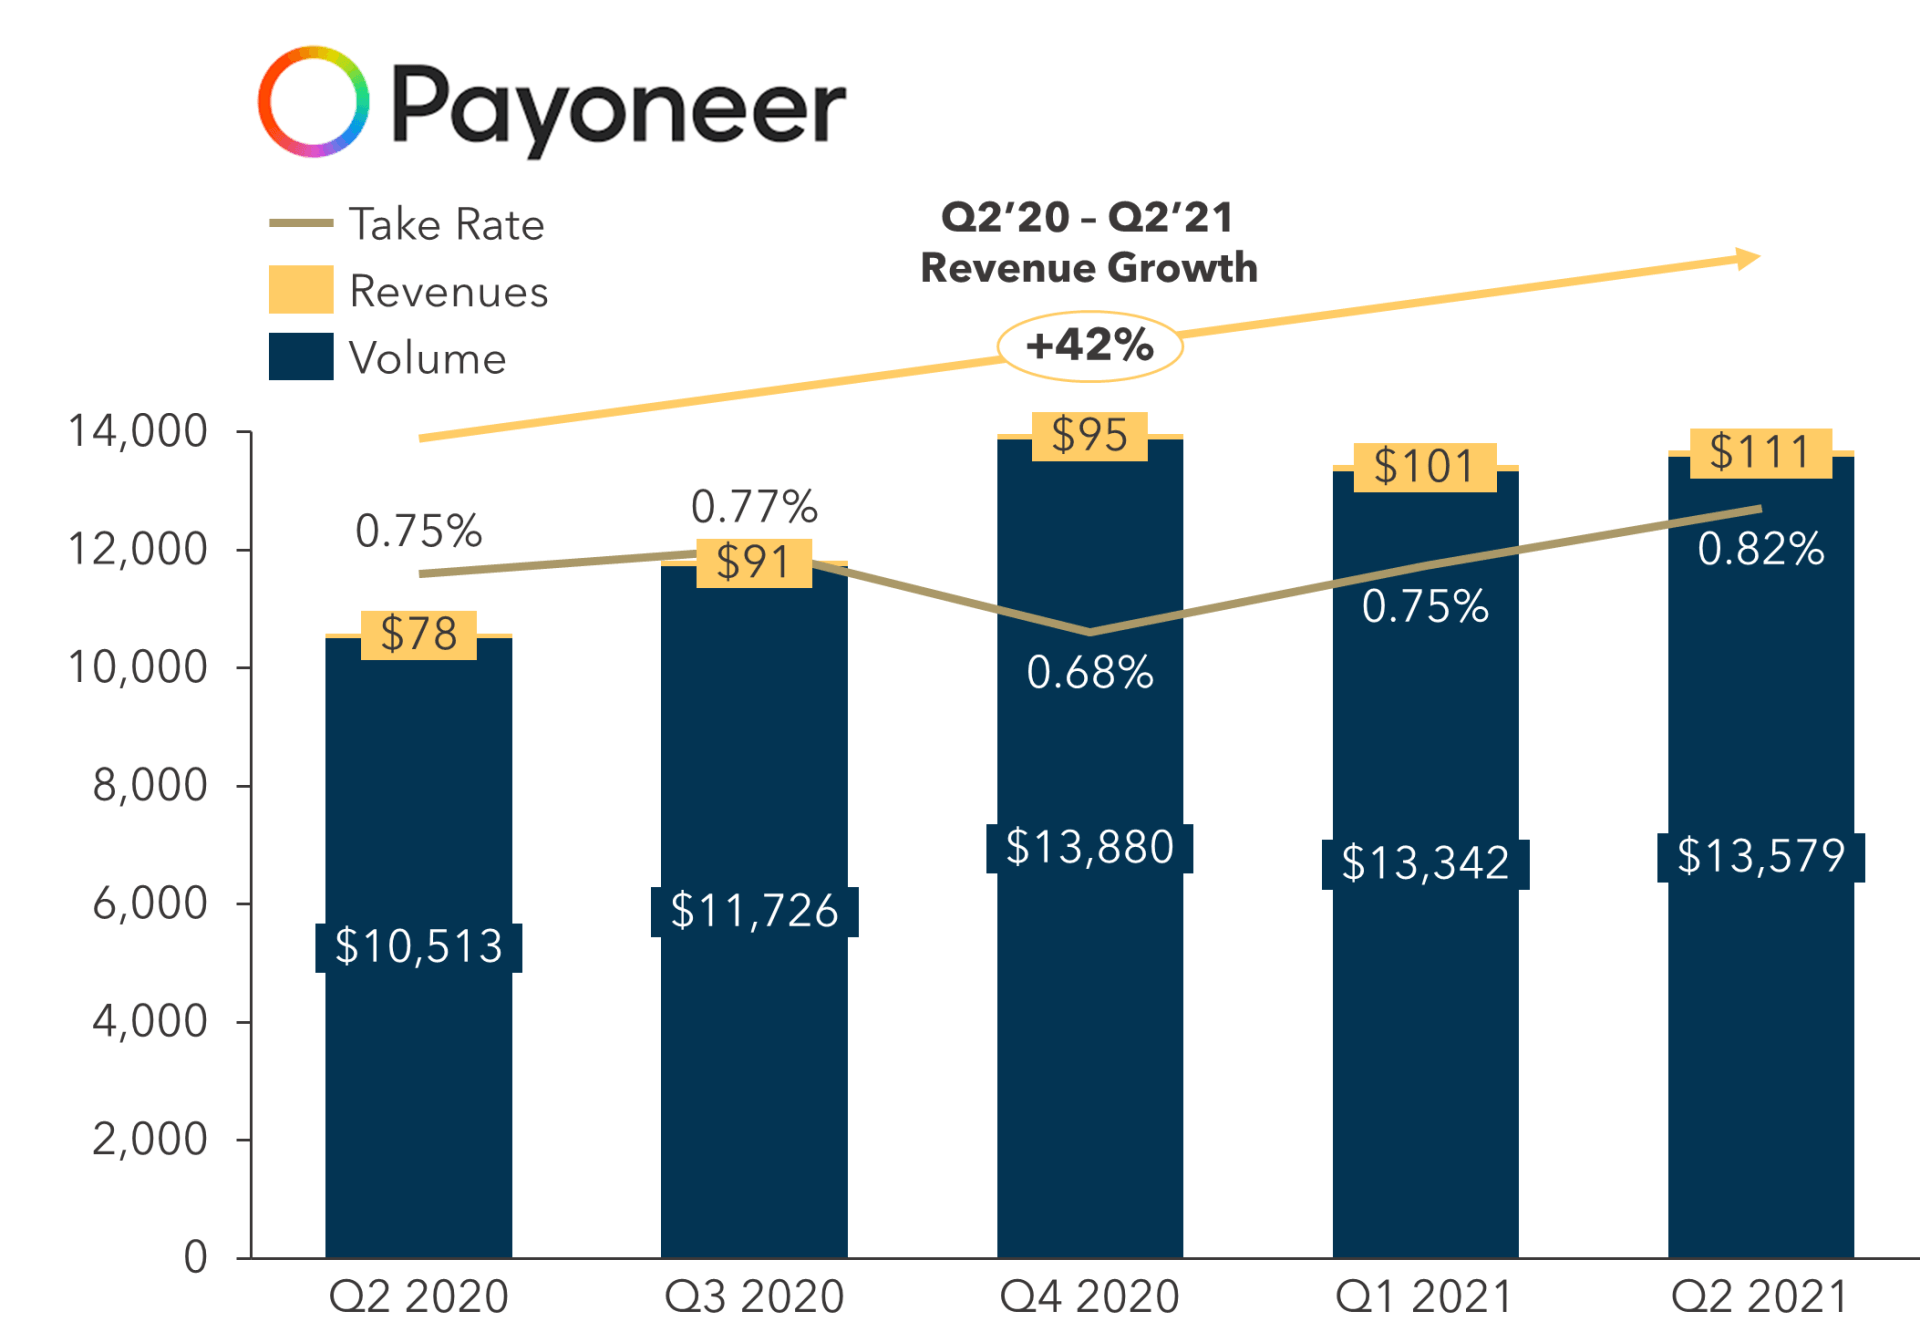 FIGURE 1: Payoneer Quarterly Revenues and Volume Growth (volume and revenues in $ mil.)